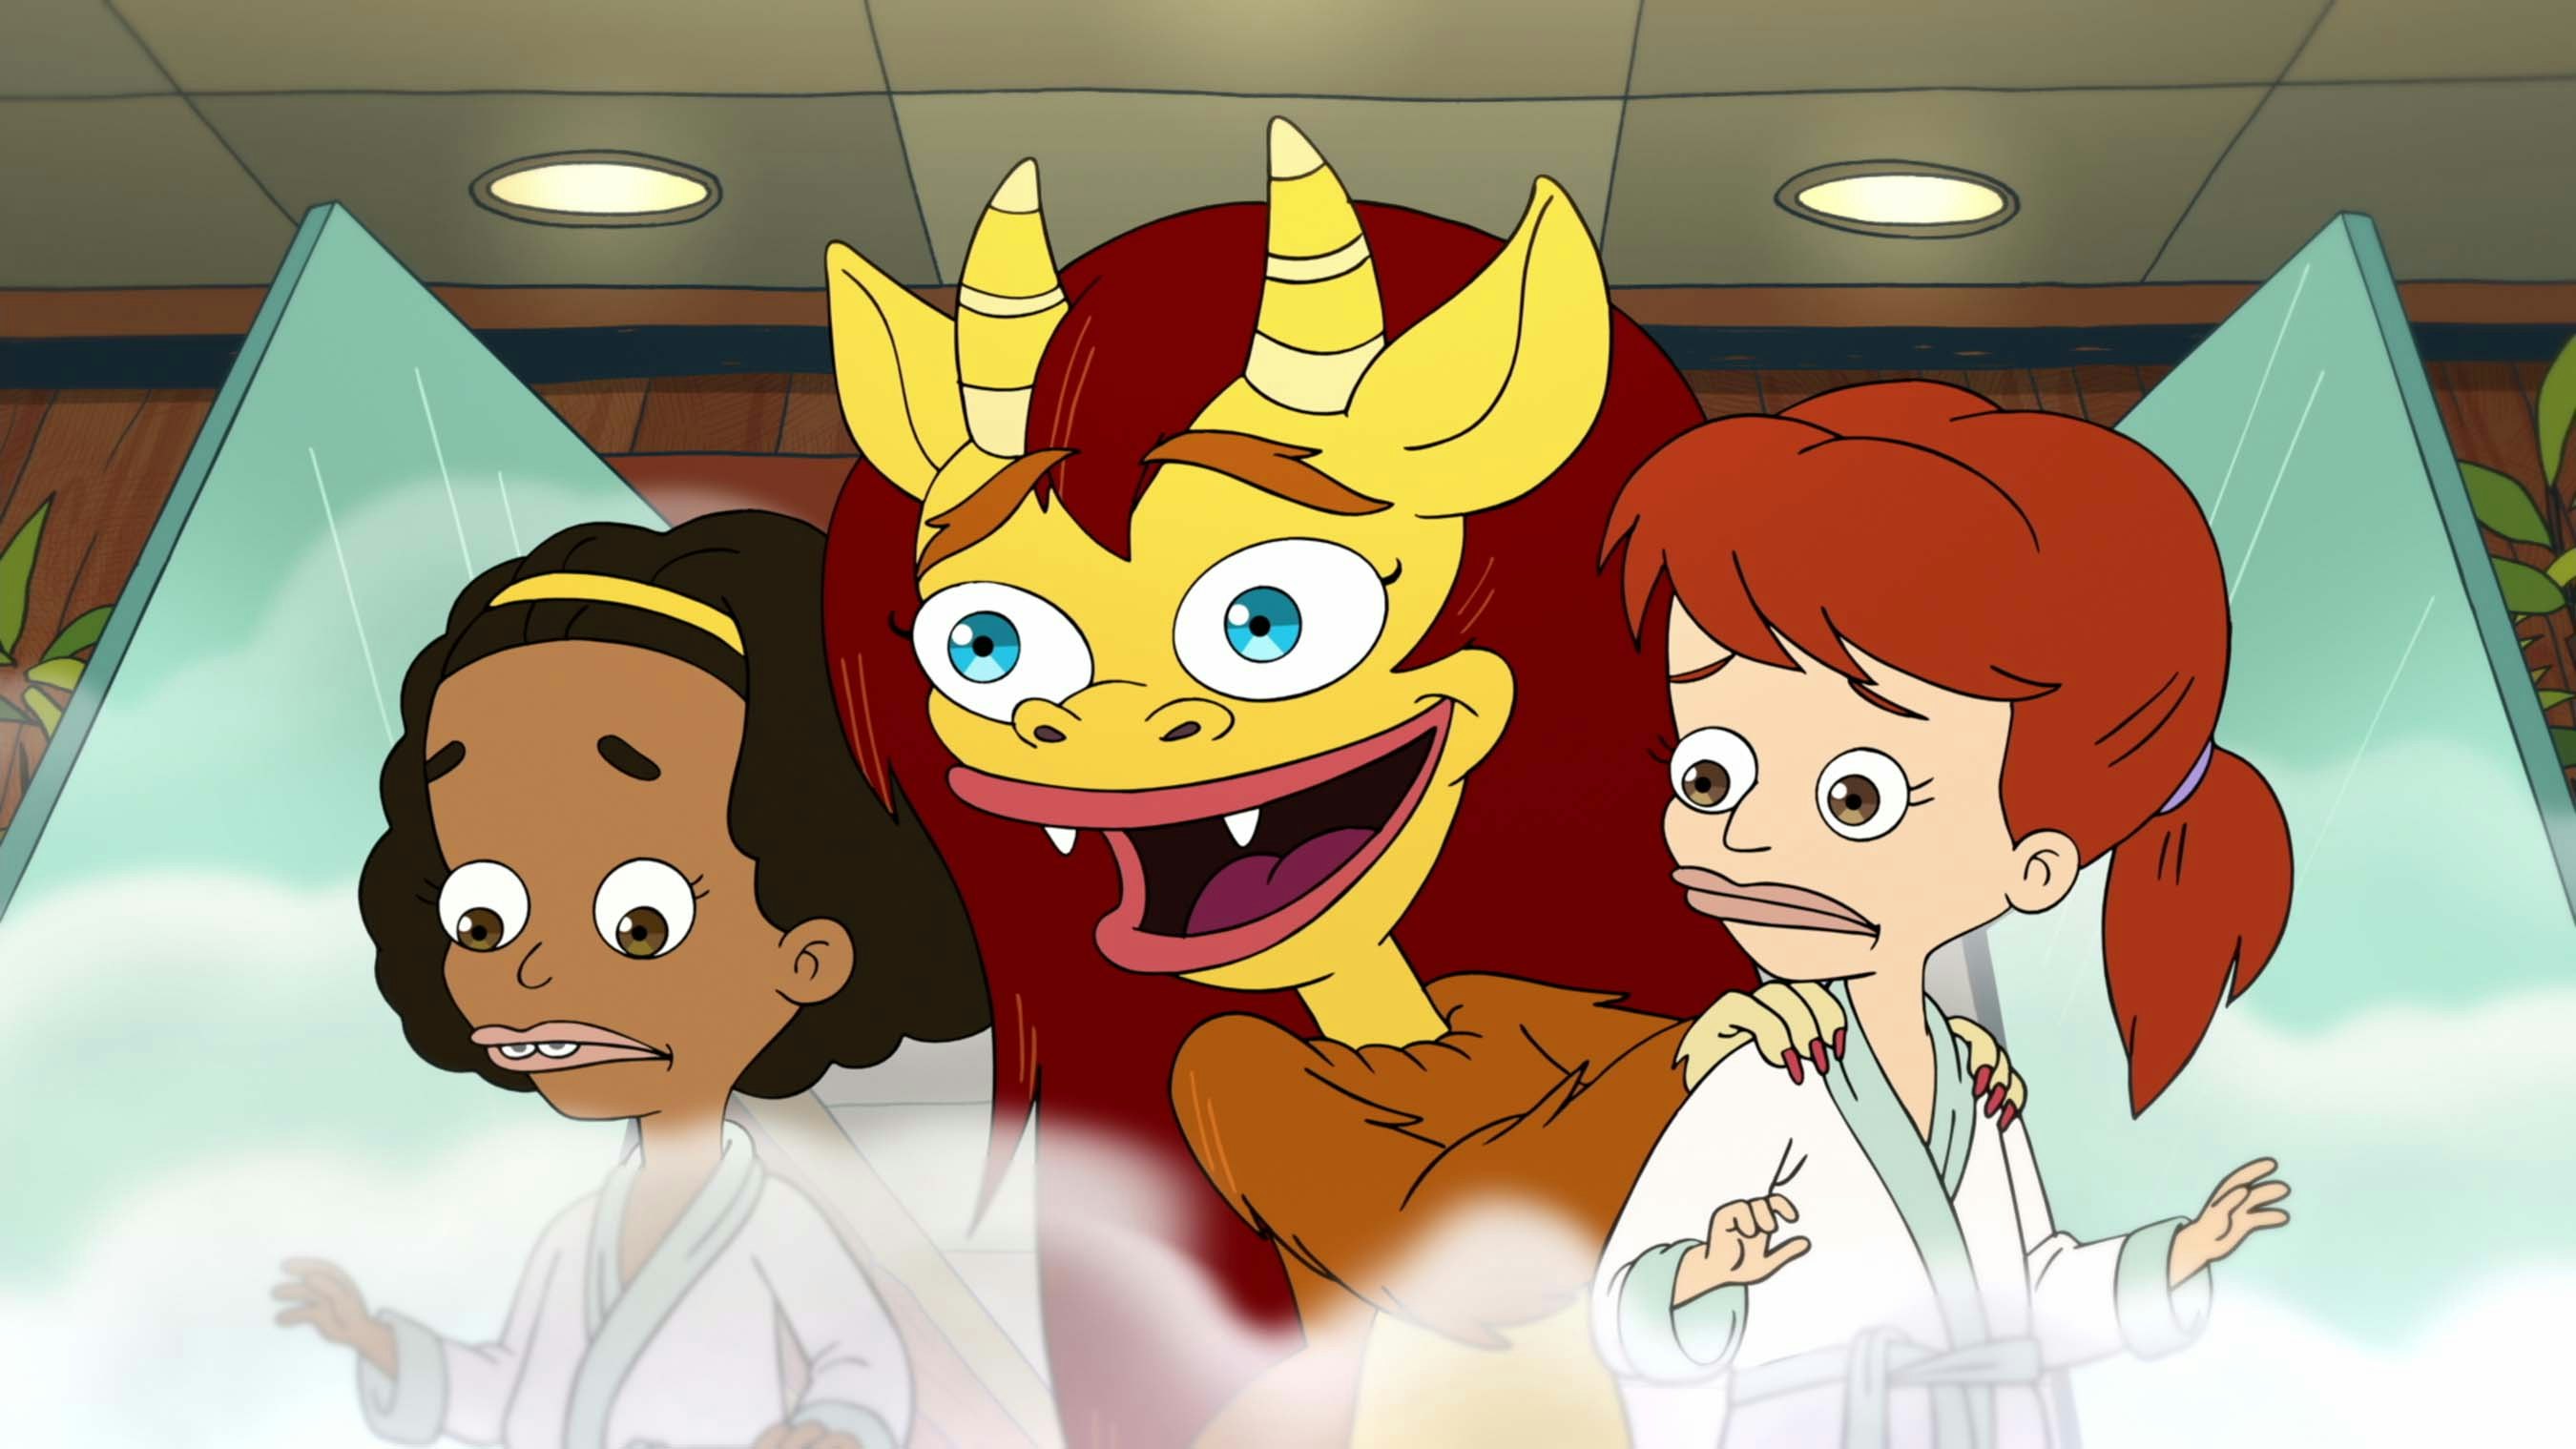 Big Mouth' Season 4 release date, plot, characters, and more